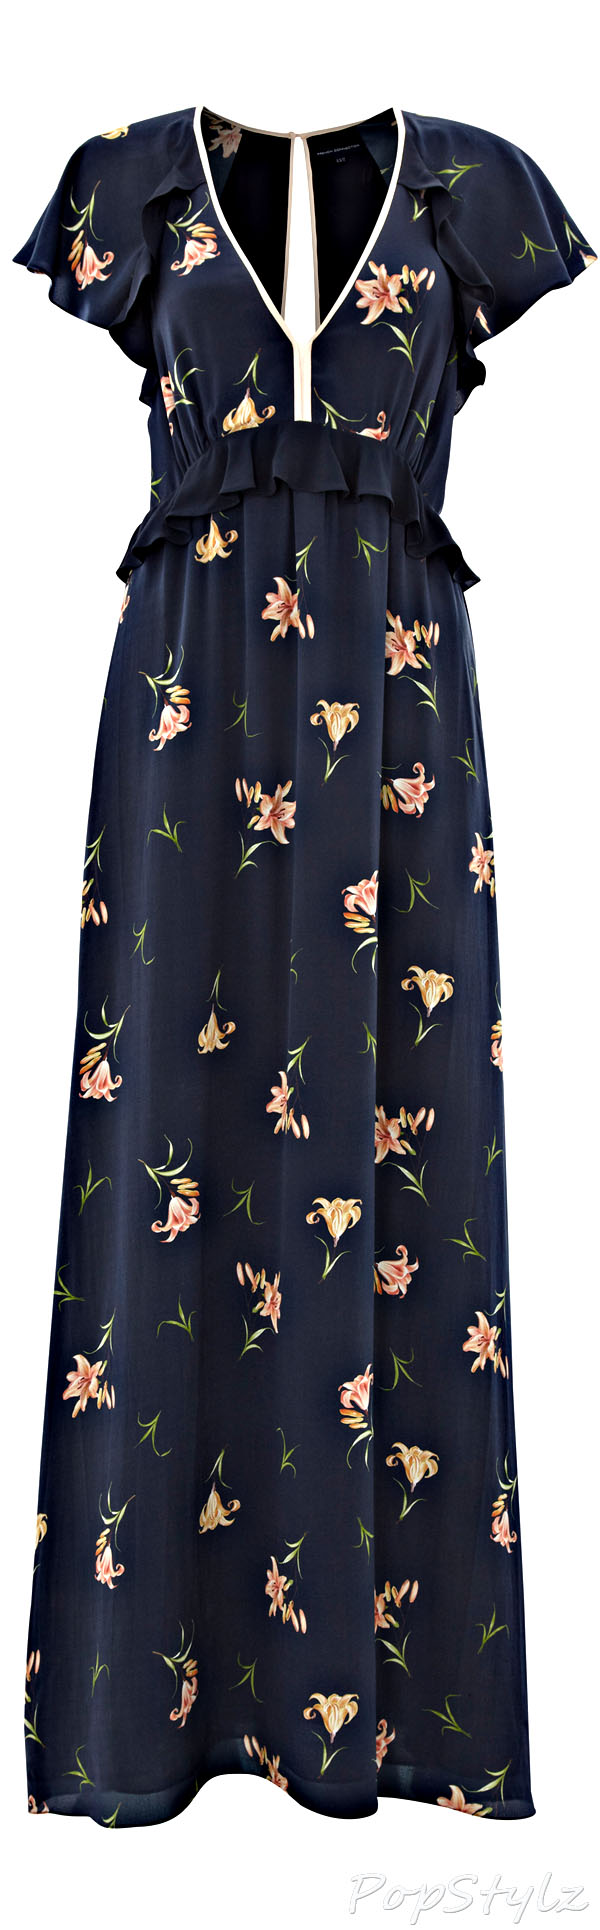 French Connection Lilly Anna Silk Maxi Dress